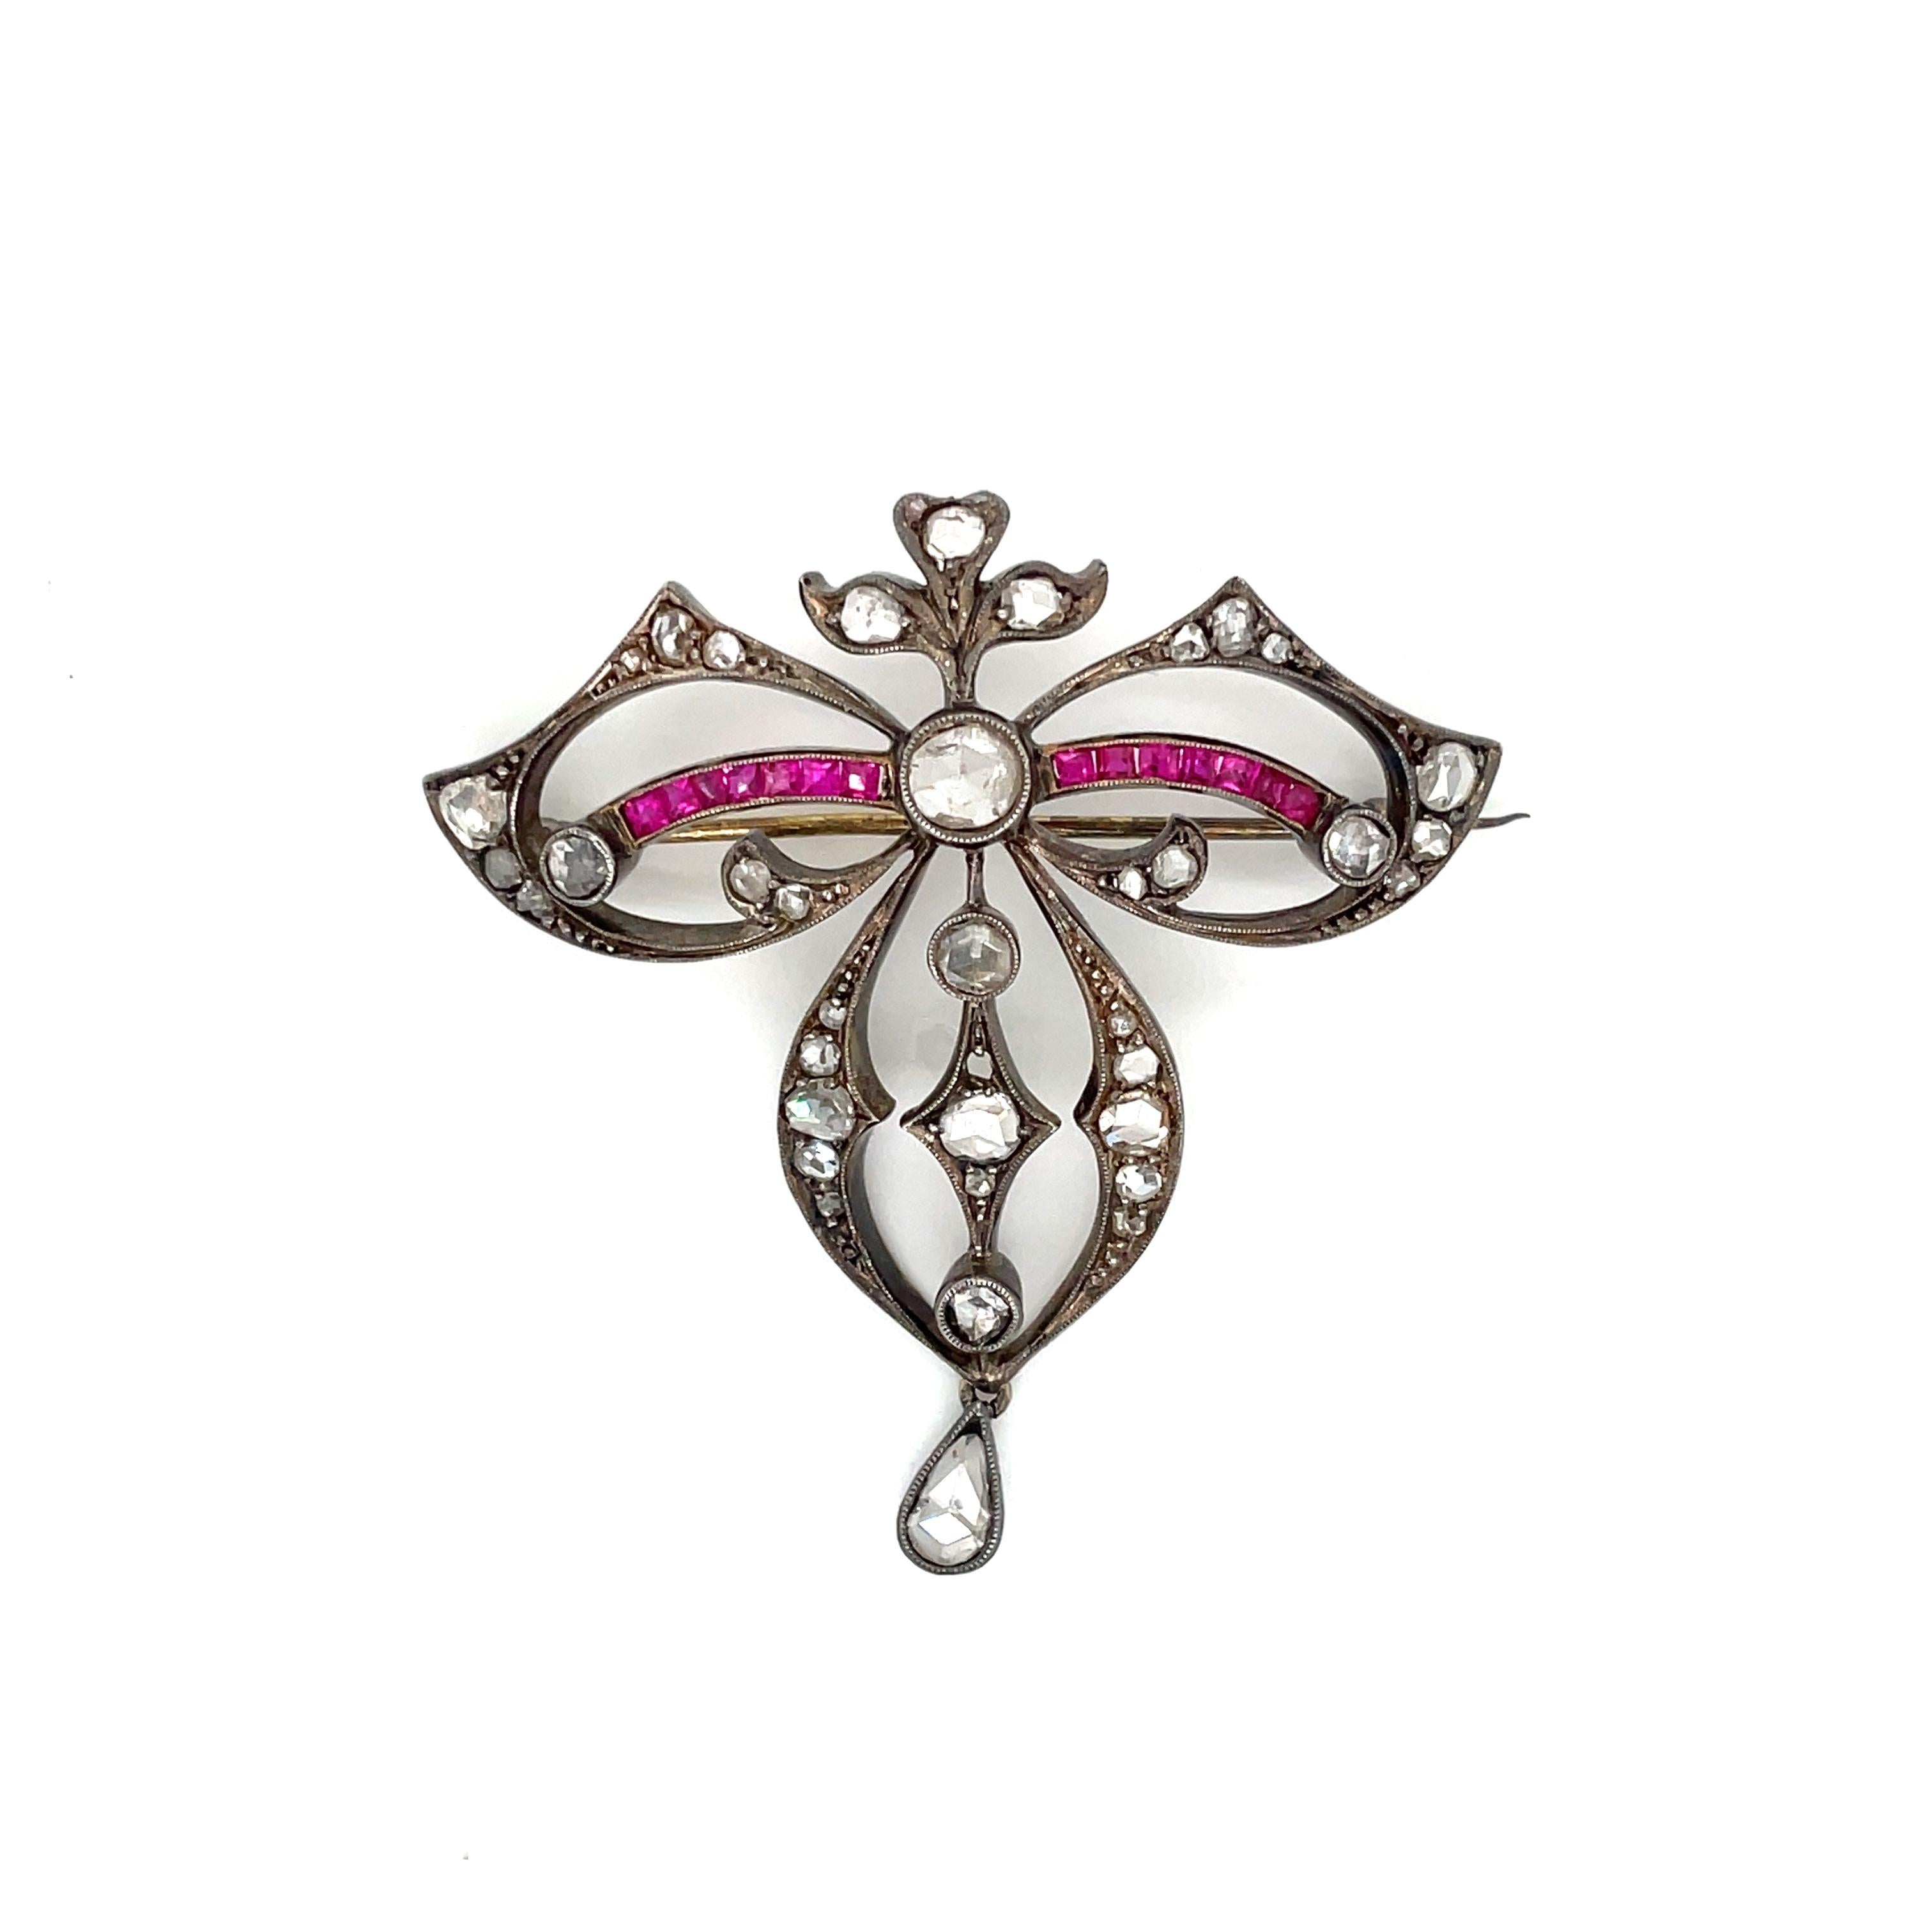 Wonderful Belle Epoque brooch in 12 kt gold and silver with sparkling rose-cut diamonds (approx. 1.50 ct) and vivid baguette-cut rubies (approx. 2.00 ct). The brooch, perfectly preserved, does not show any signs of wear. It was designed to also be